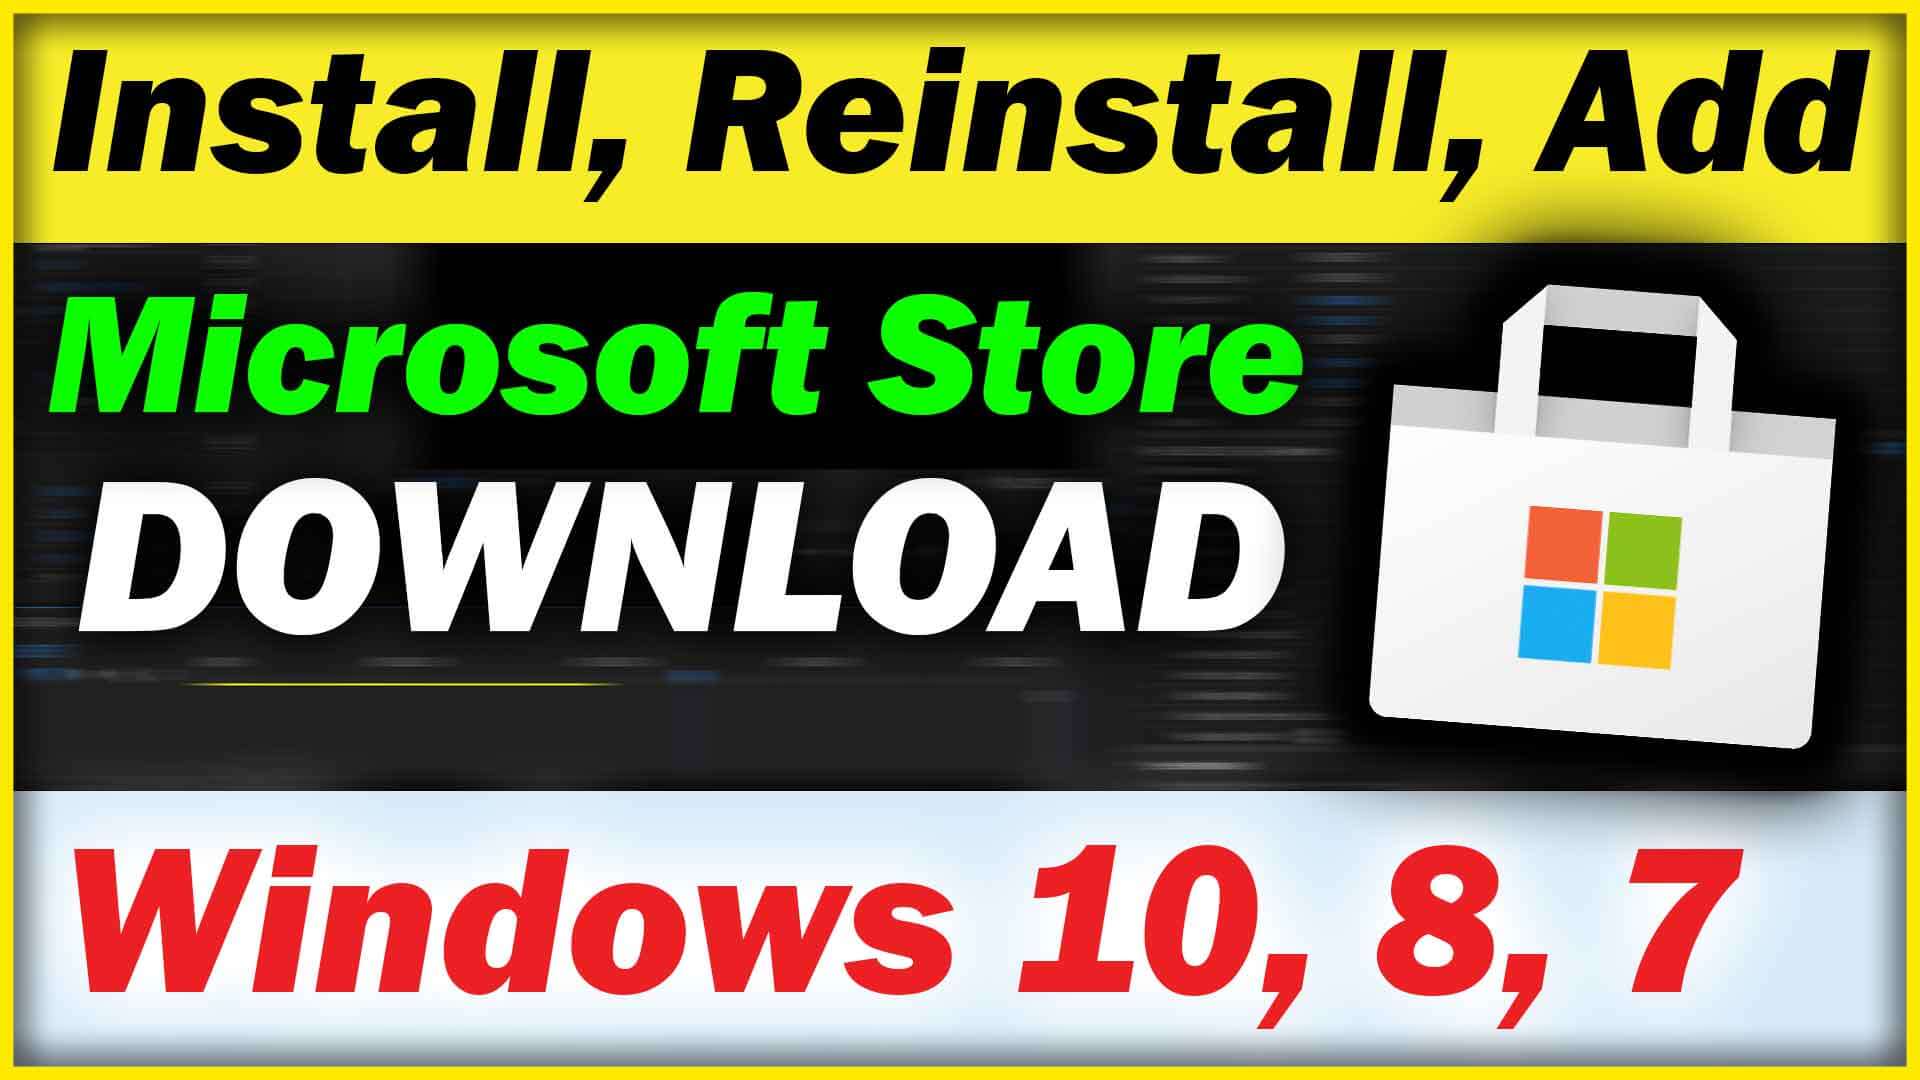 You are currently viewing Install/Reinstall Microsoft Store in Windows 10 LTSC, LTSB